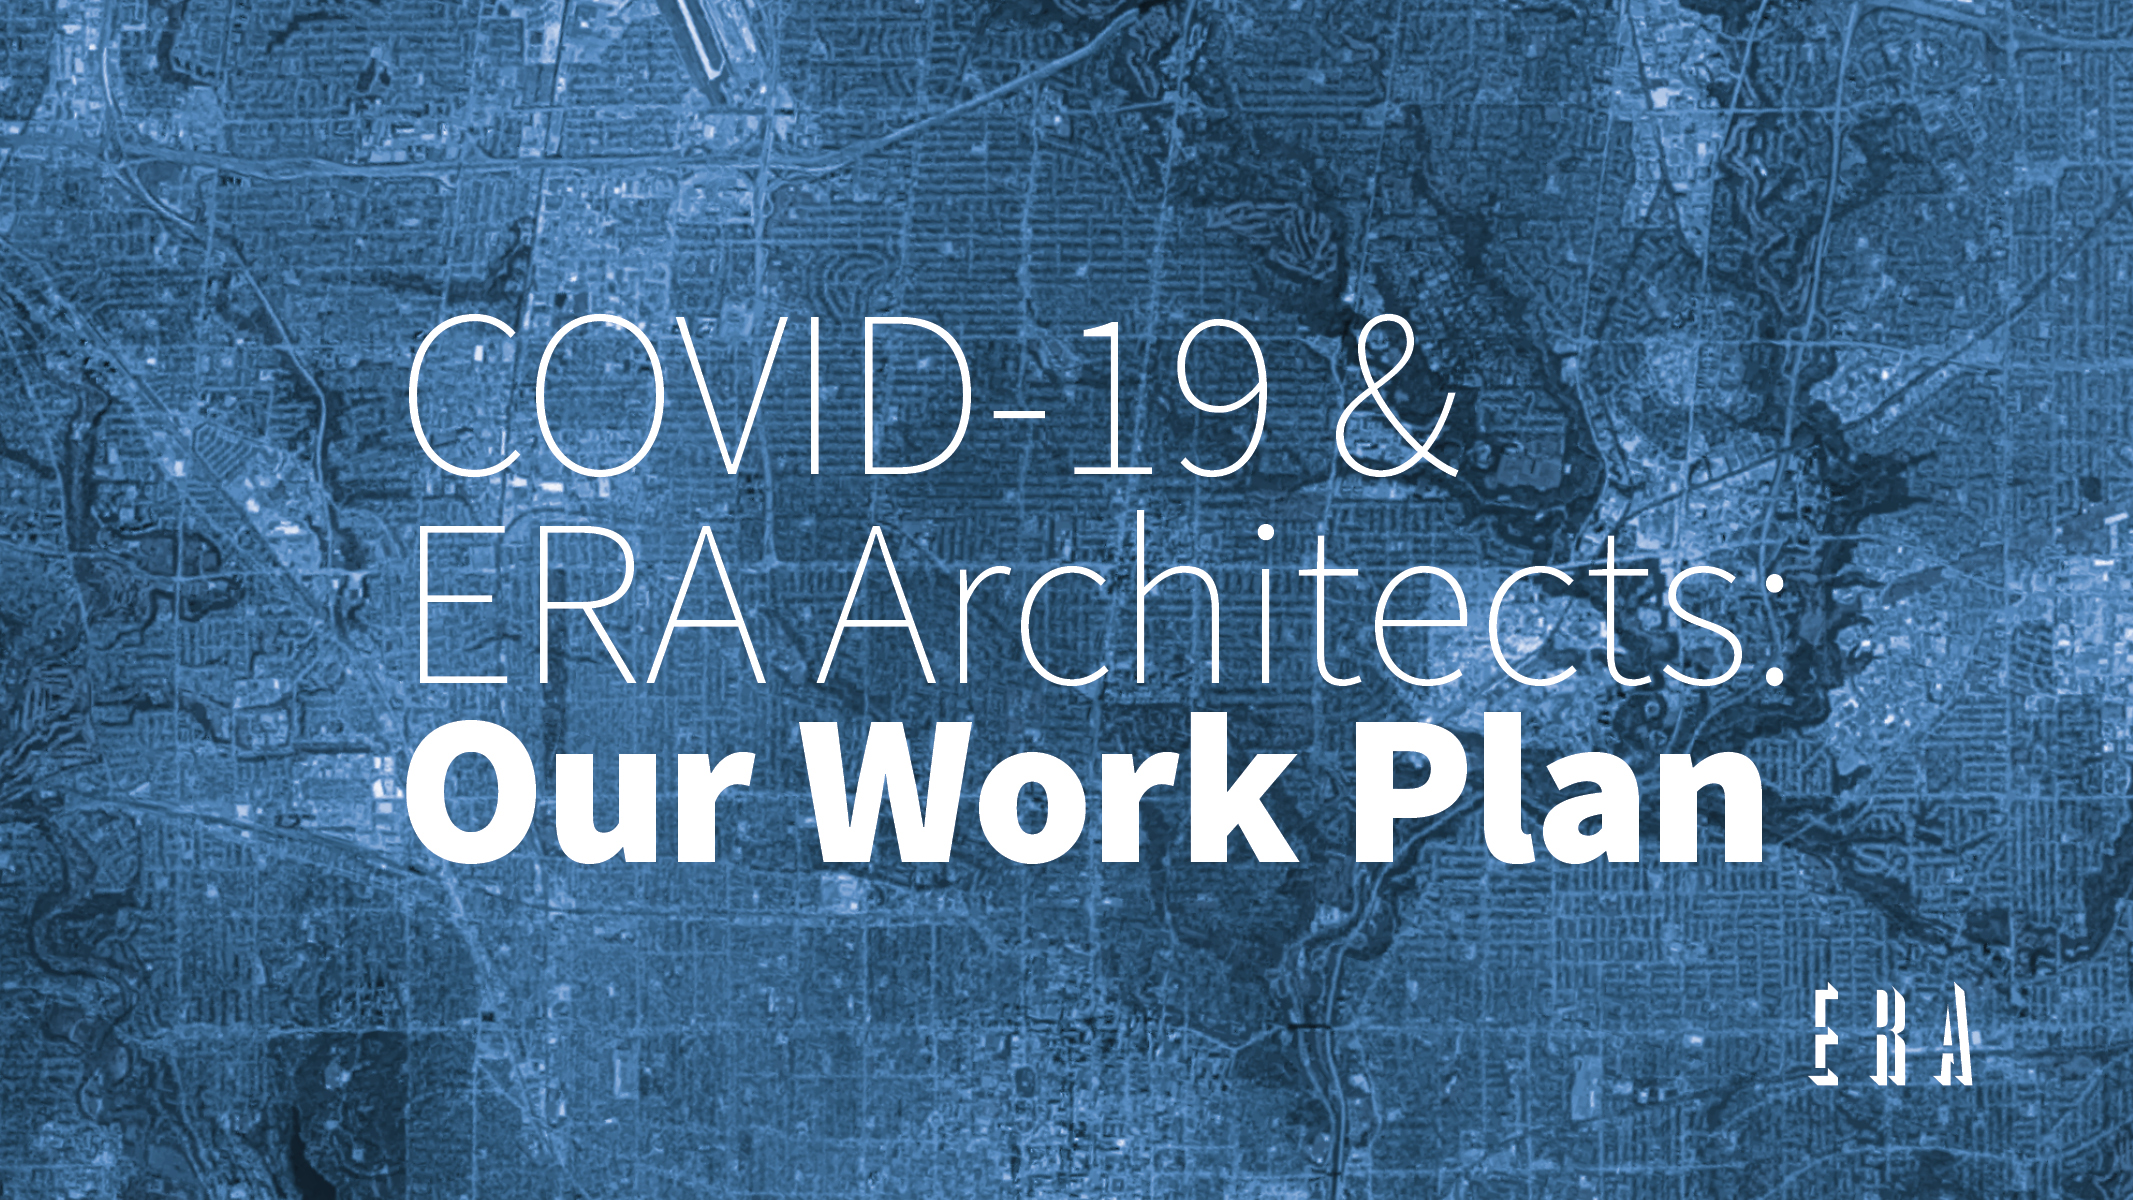 COVID-19 and ERA Architects: Our Work Plan